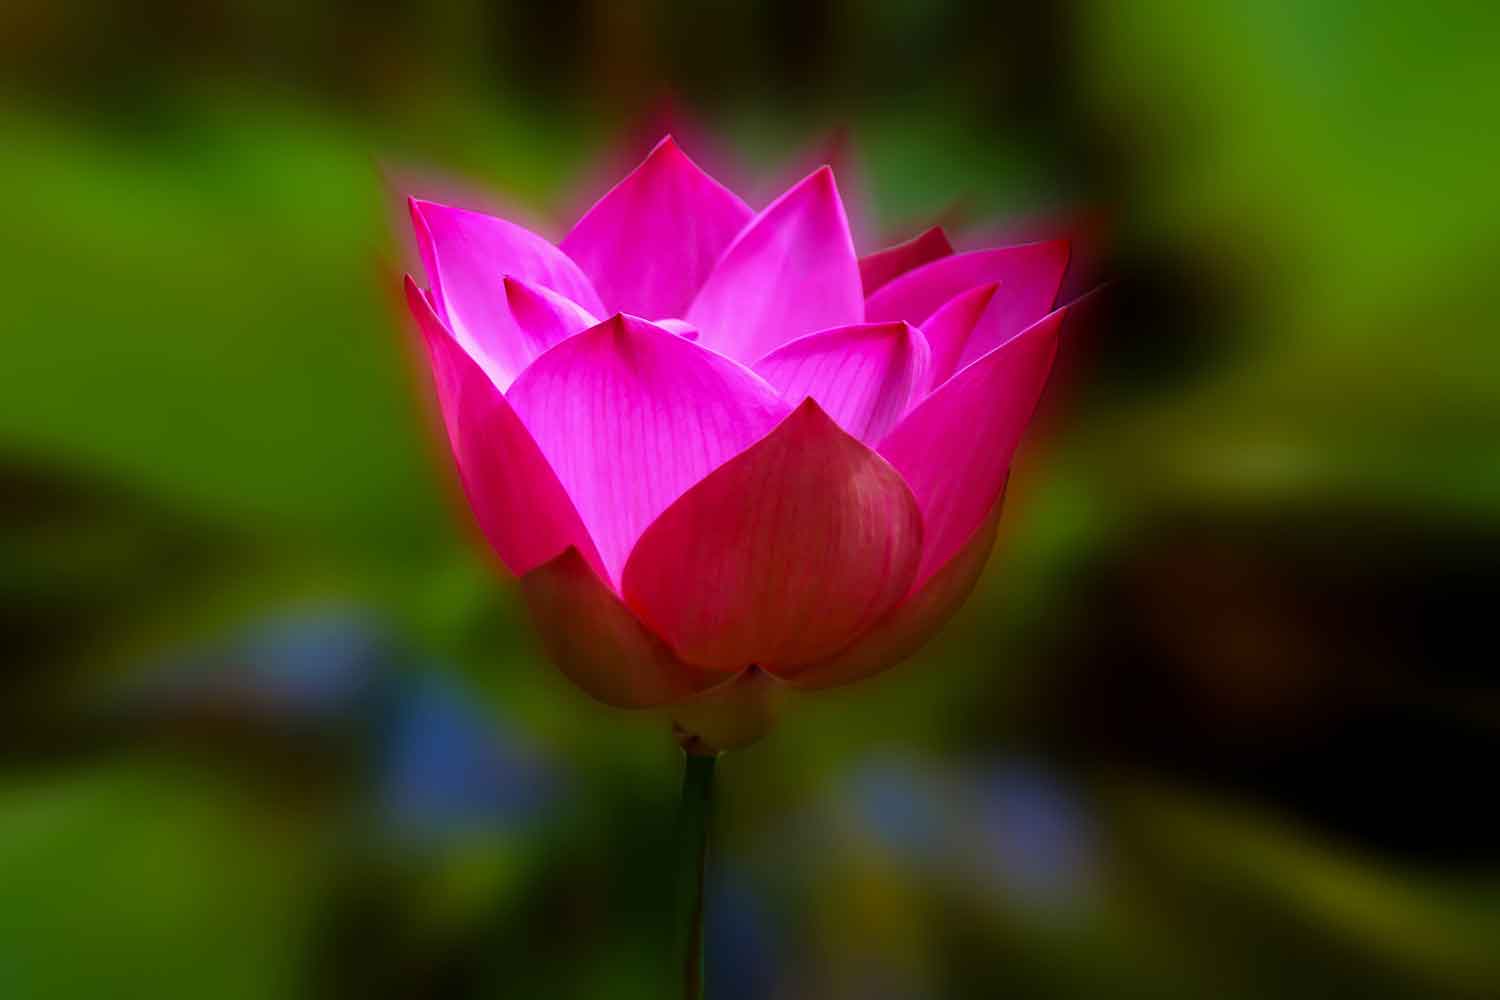 humanity's blossoming - the rise of the lotus flower